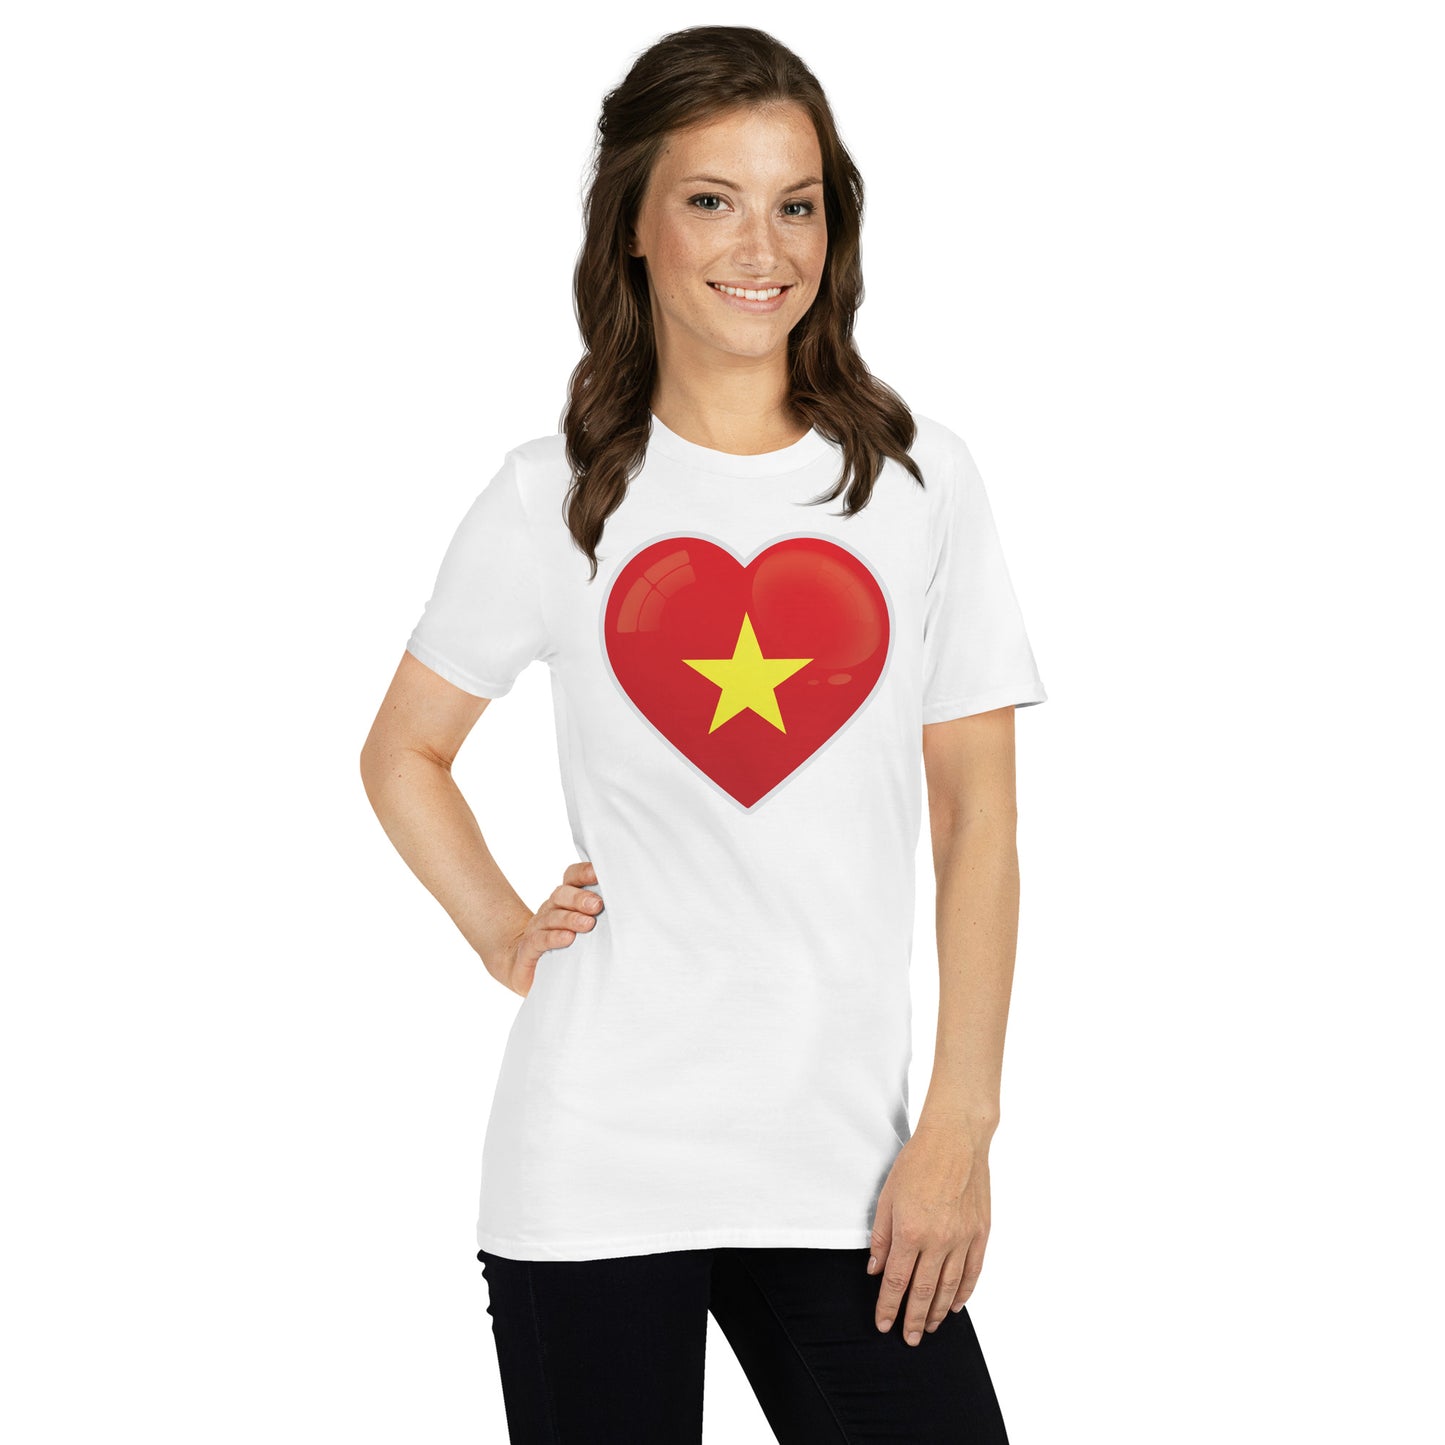 Show your pride in Vietnam with this red heart T-Shirt